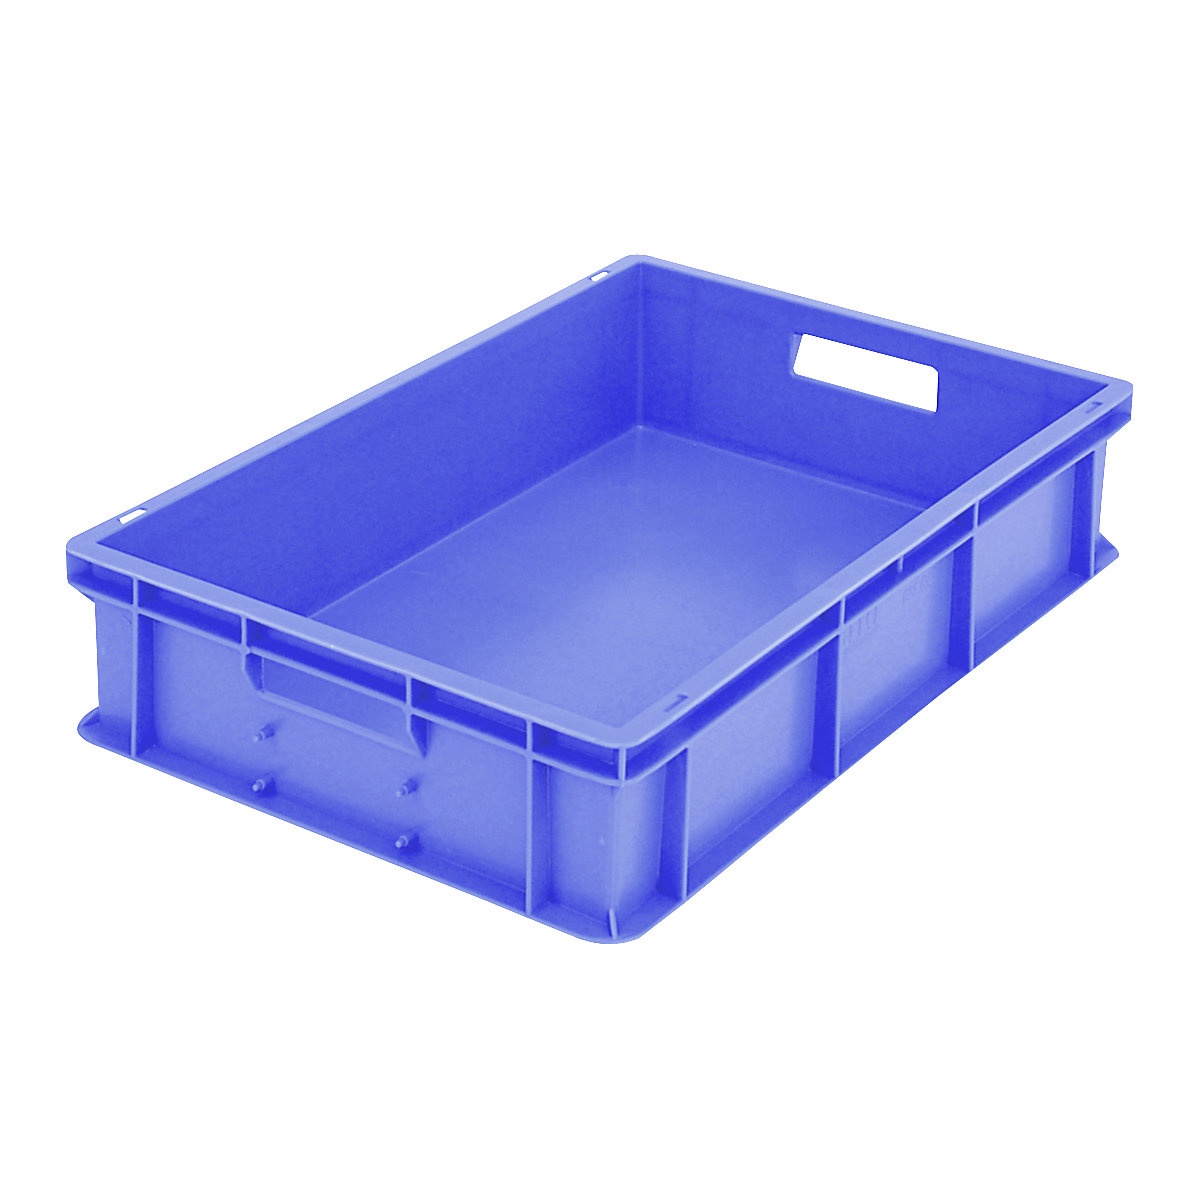 BN Euro stacking container – BITO, solid walls and base, LxWxH 600 x 400 x 130 mm-6